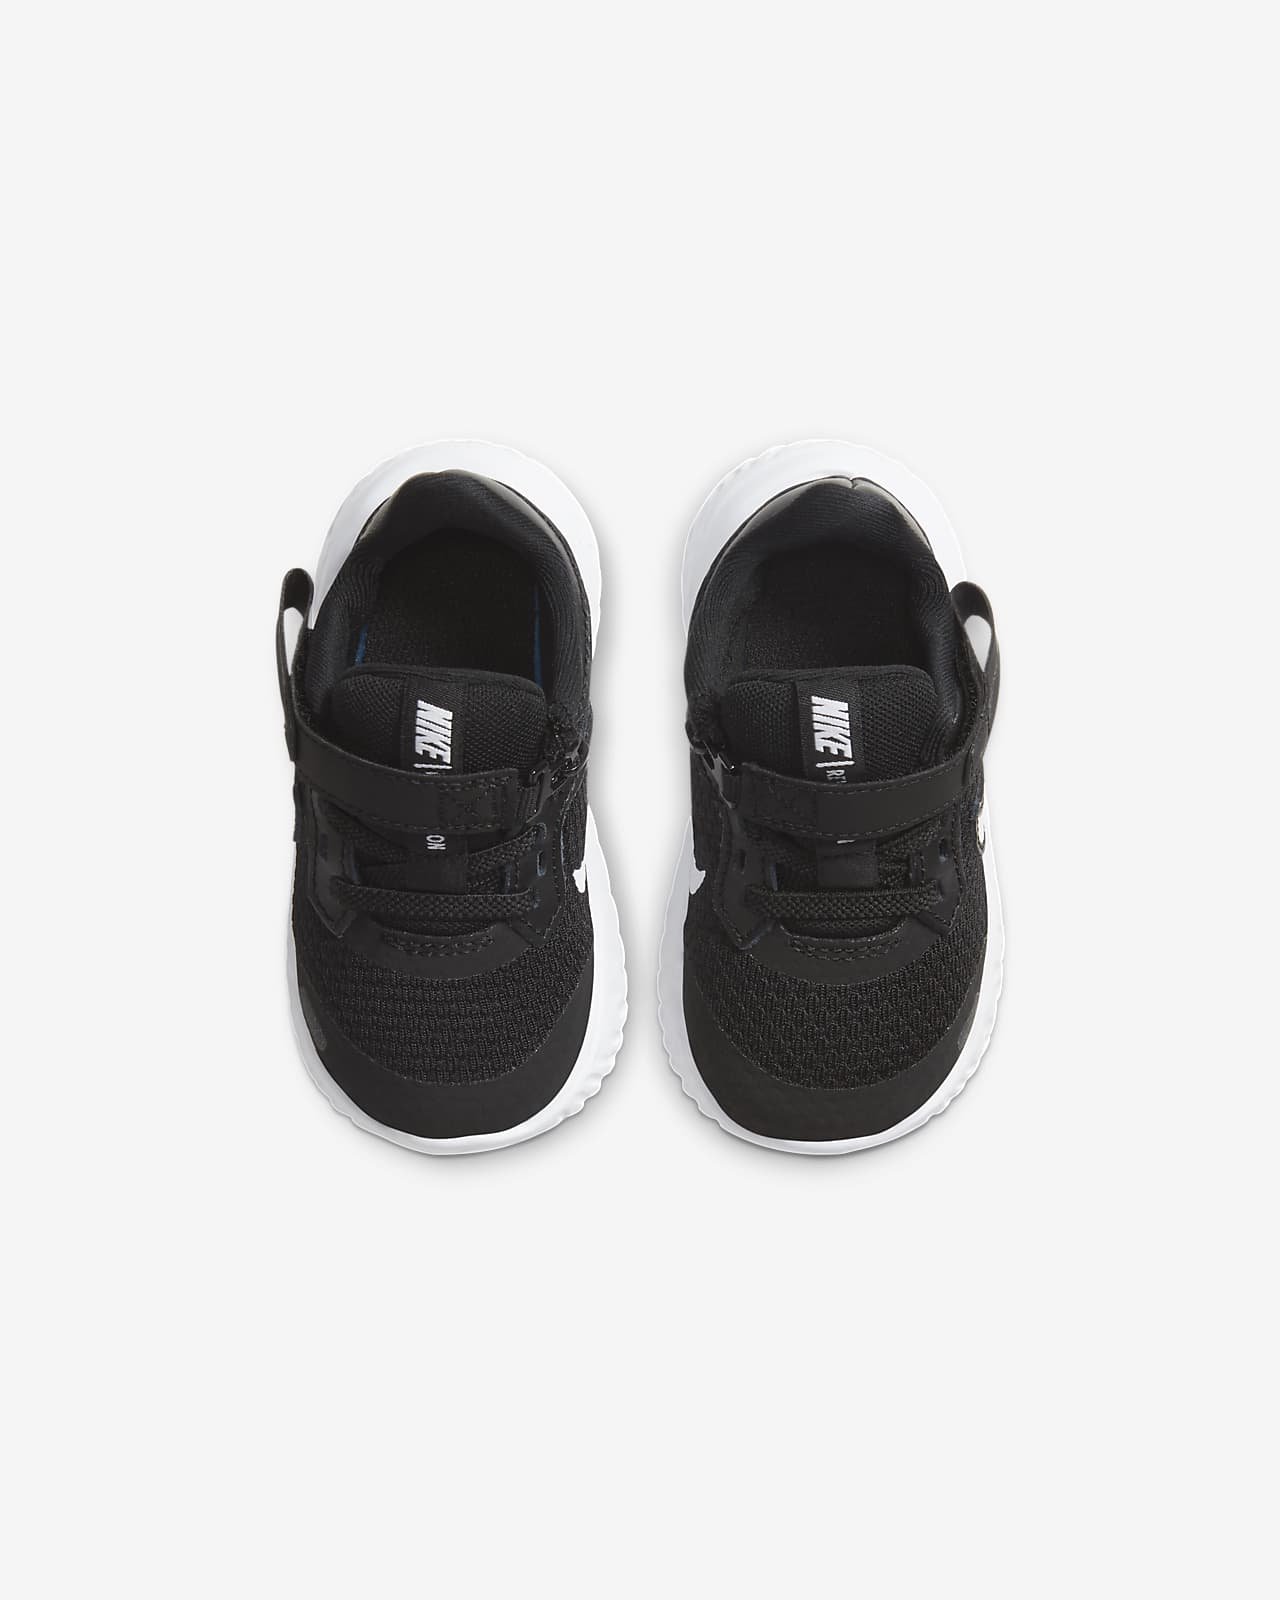 nike afo shoes for toddlers